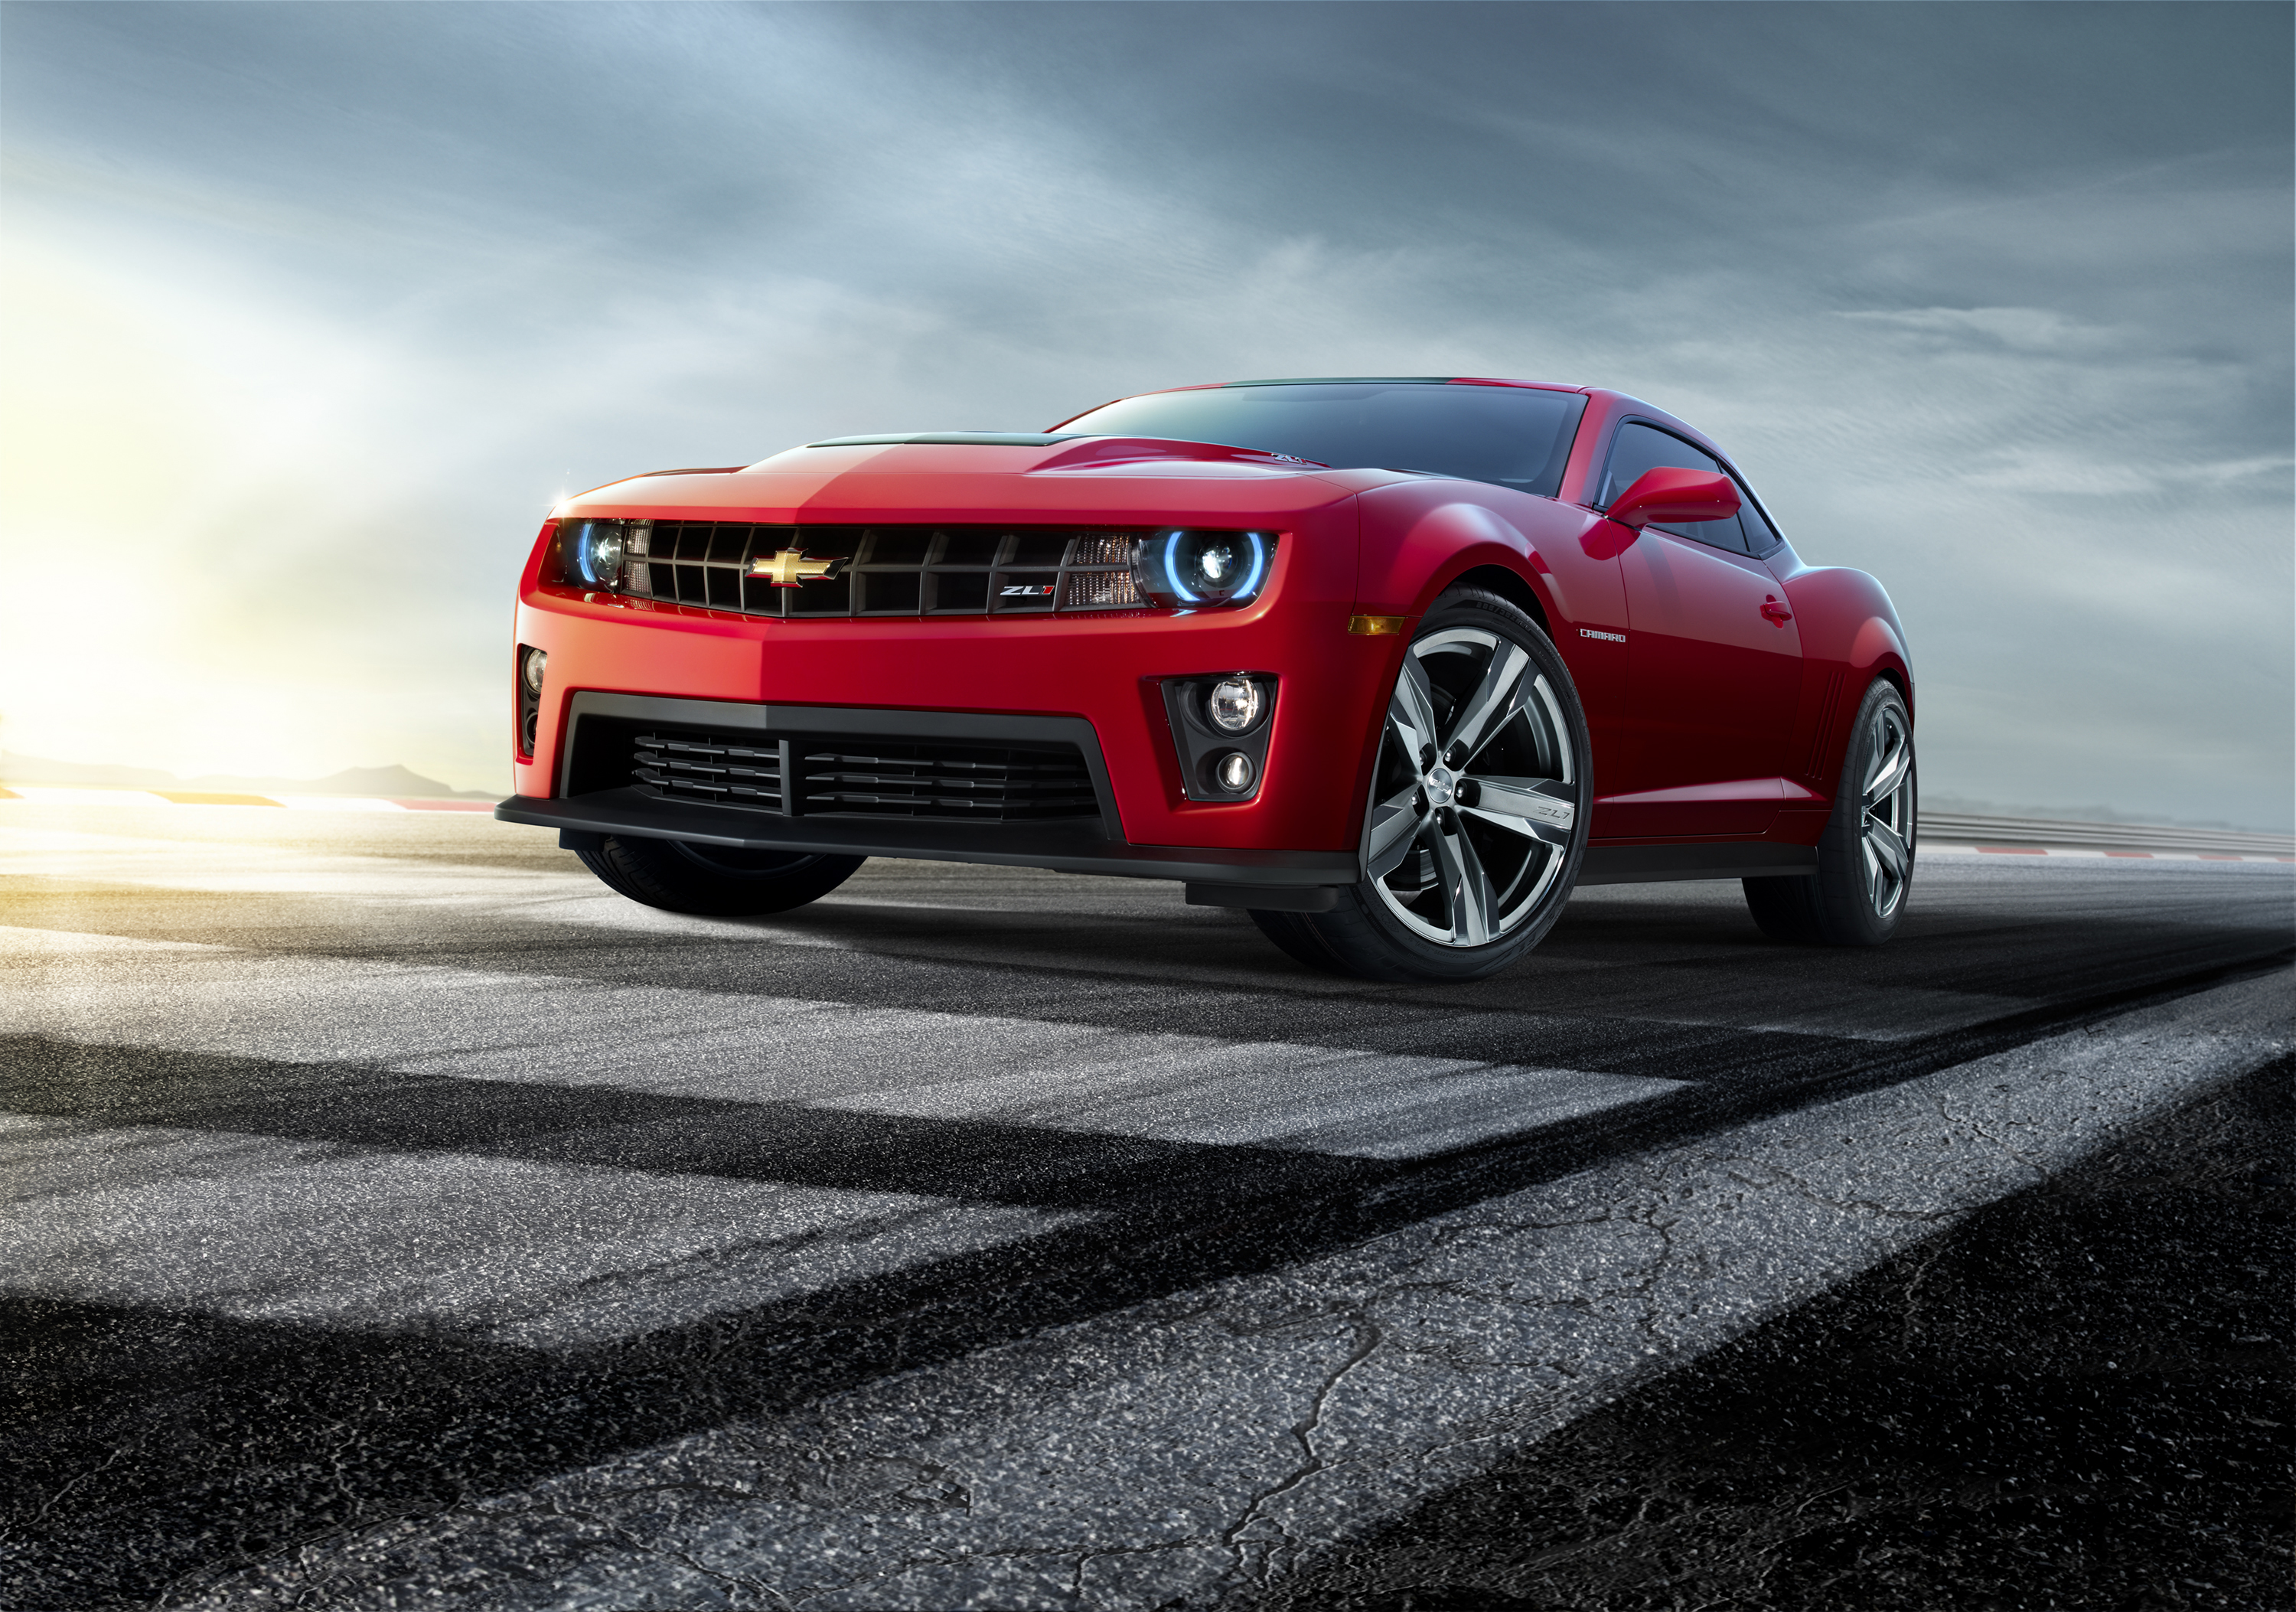 Car Chevrolet Chevrolet Camaro Chevrolet Camaro Zl1 Muscle Car Red Car Vehicle 3000x2106